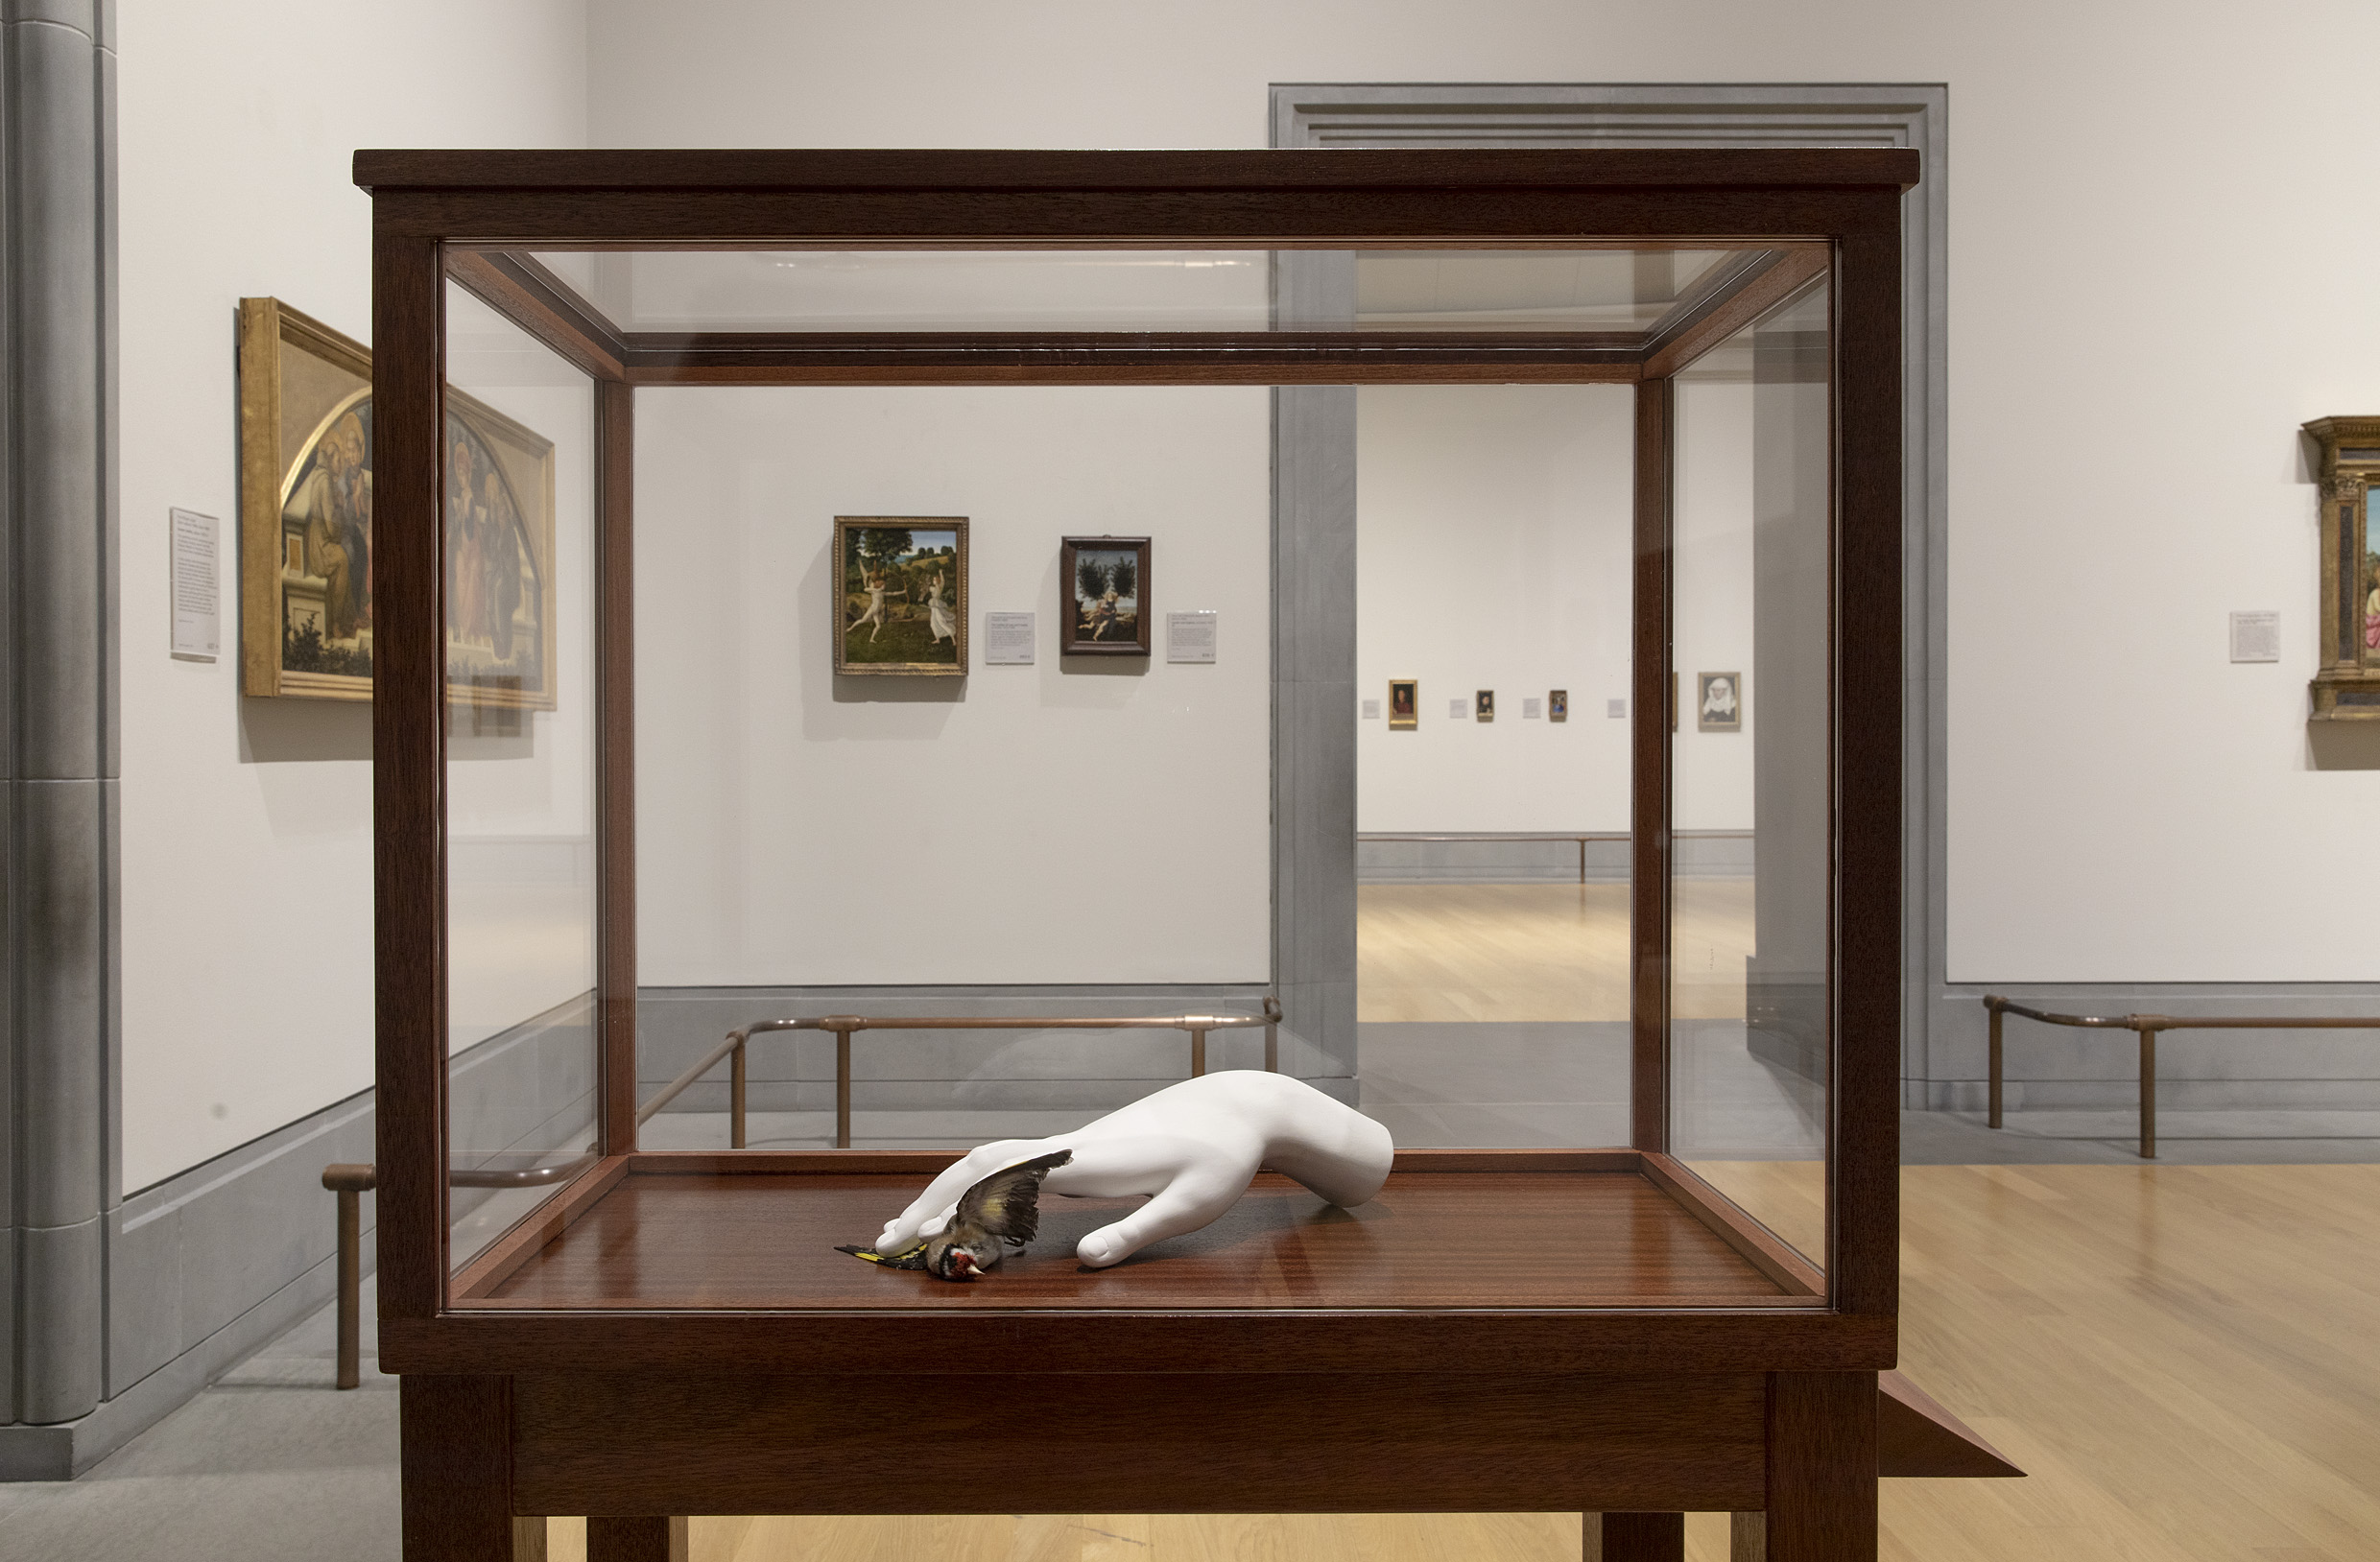 Ali Cherri's "The Madonna of the Cat, after Barocci" in a glass case on display in the National Gallery. The work is a white plaster hand pinning down a taxidermied goldfinch.